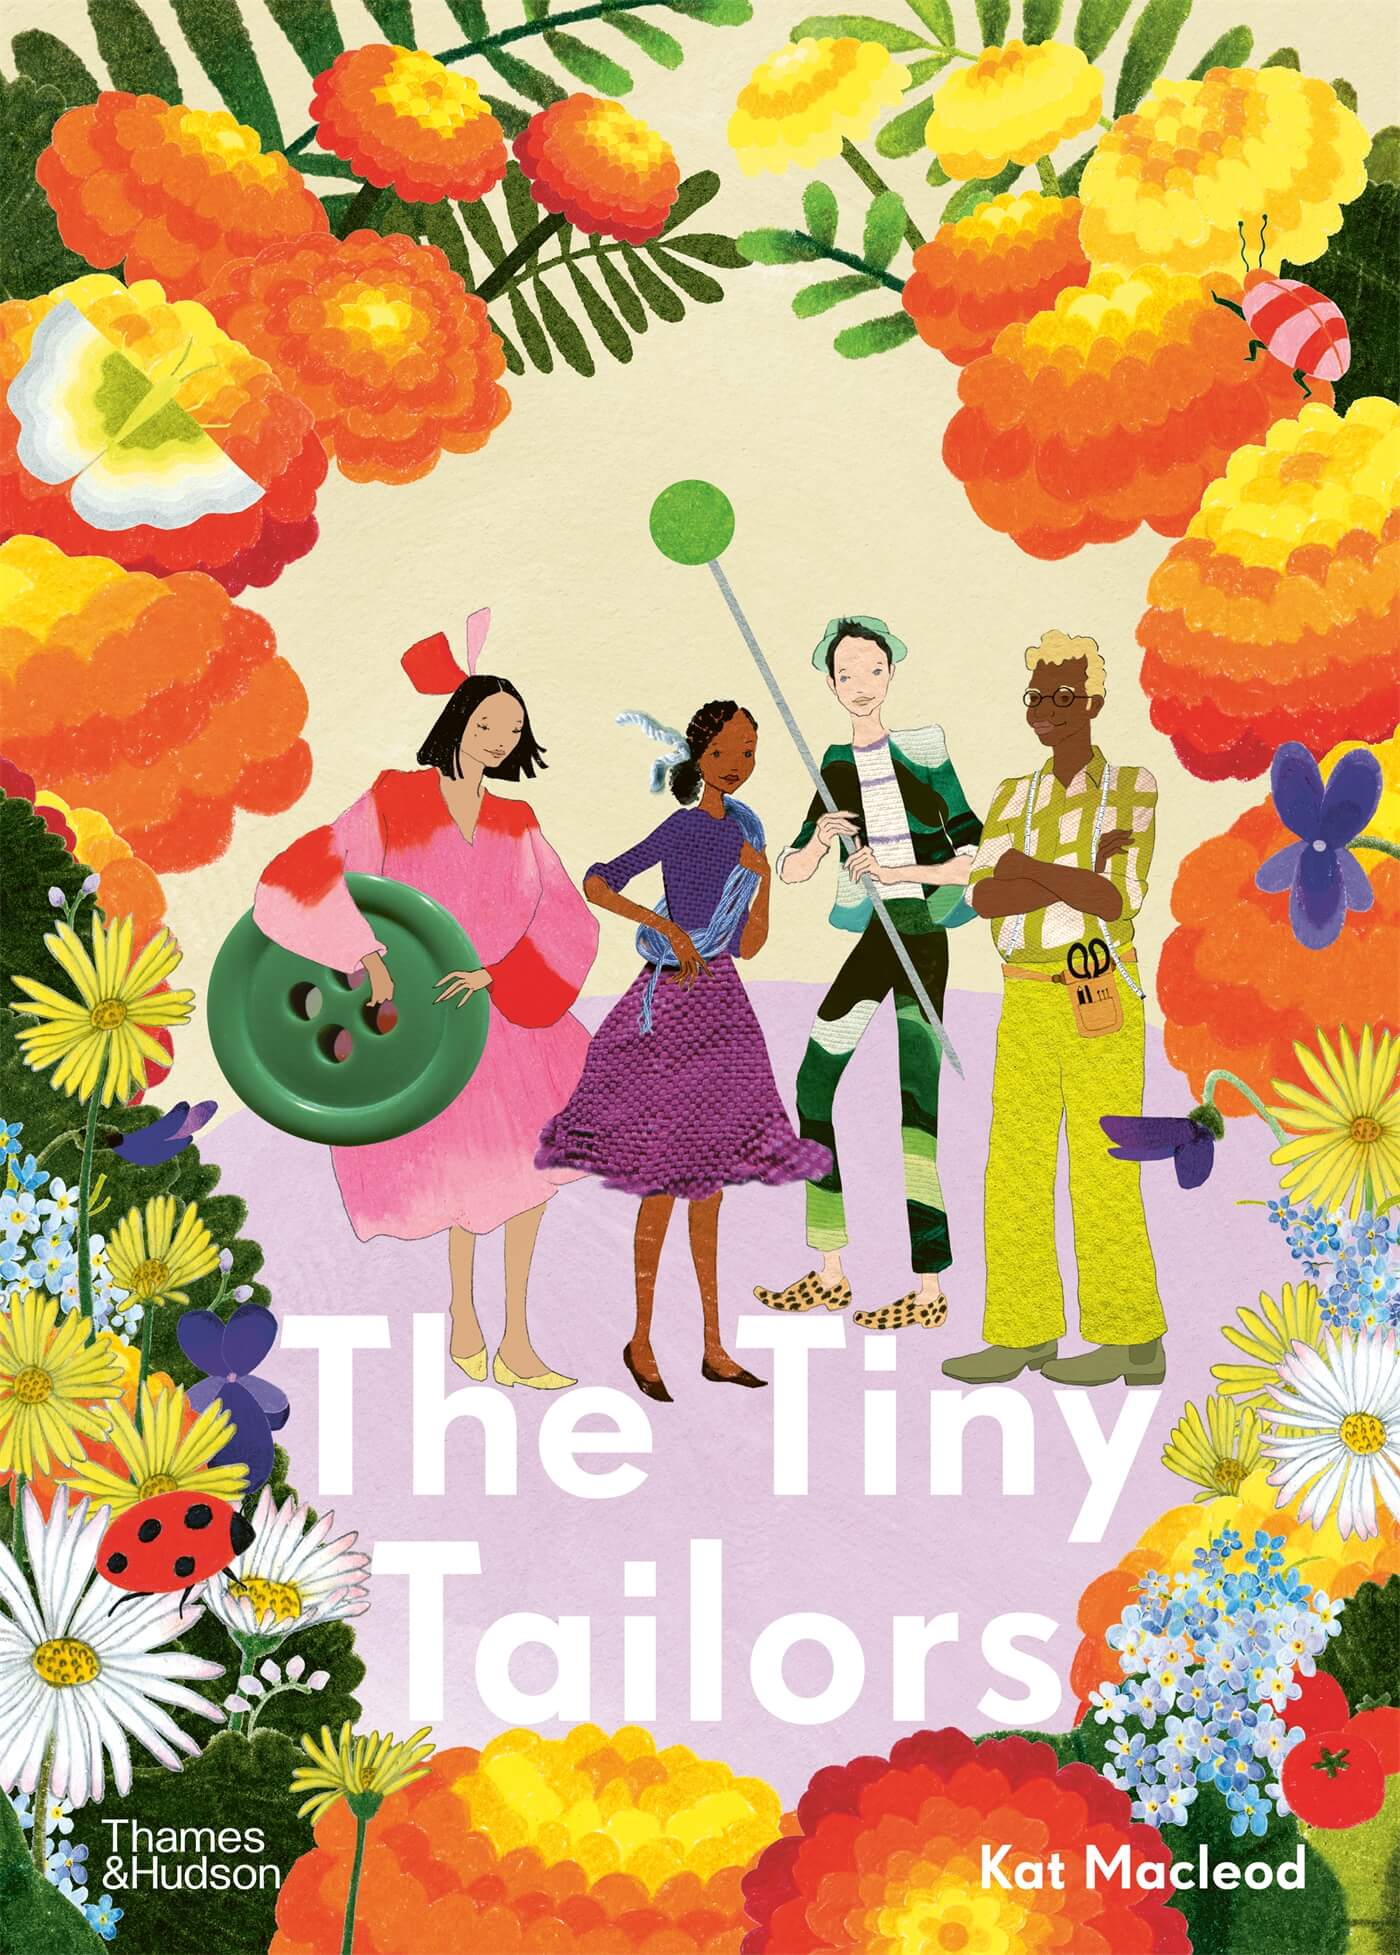 Book cover of lead title. Colourful collage of flowers and plants bordering four small figures with titles printed in white, bold, sans serif font